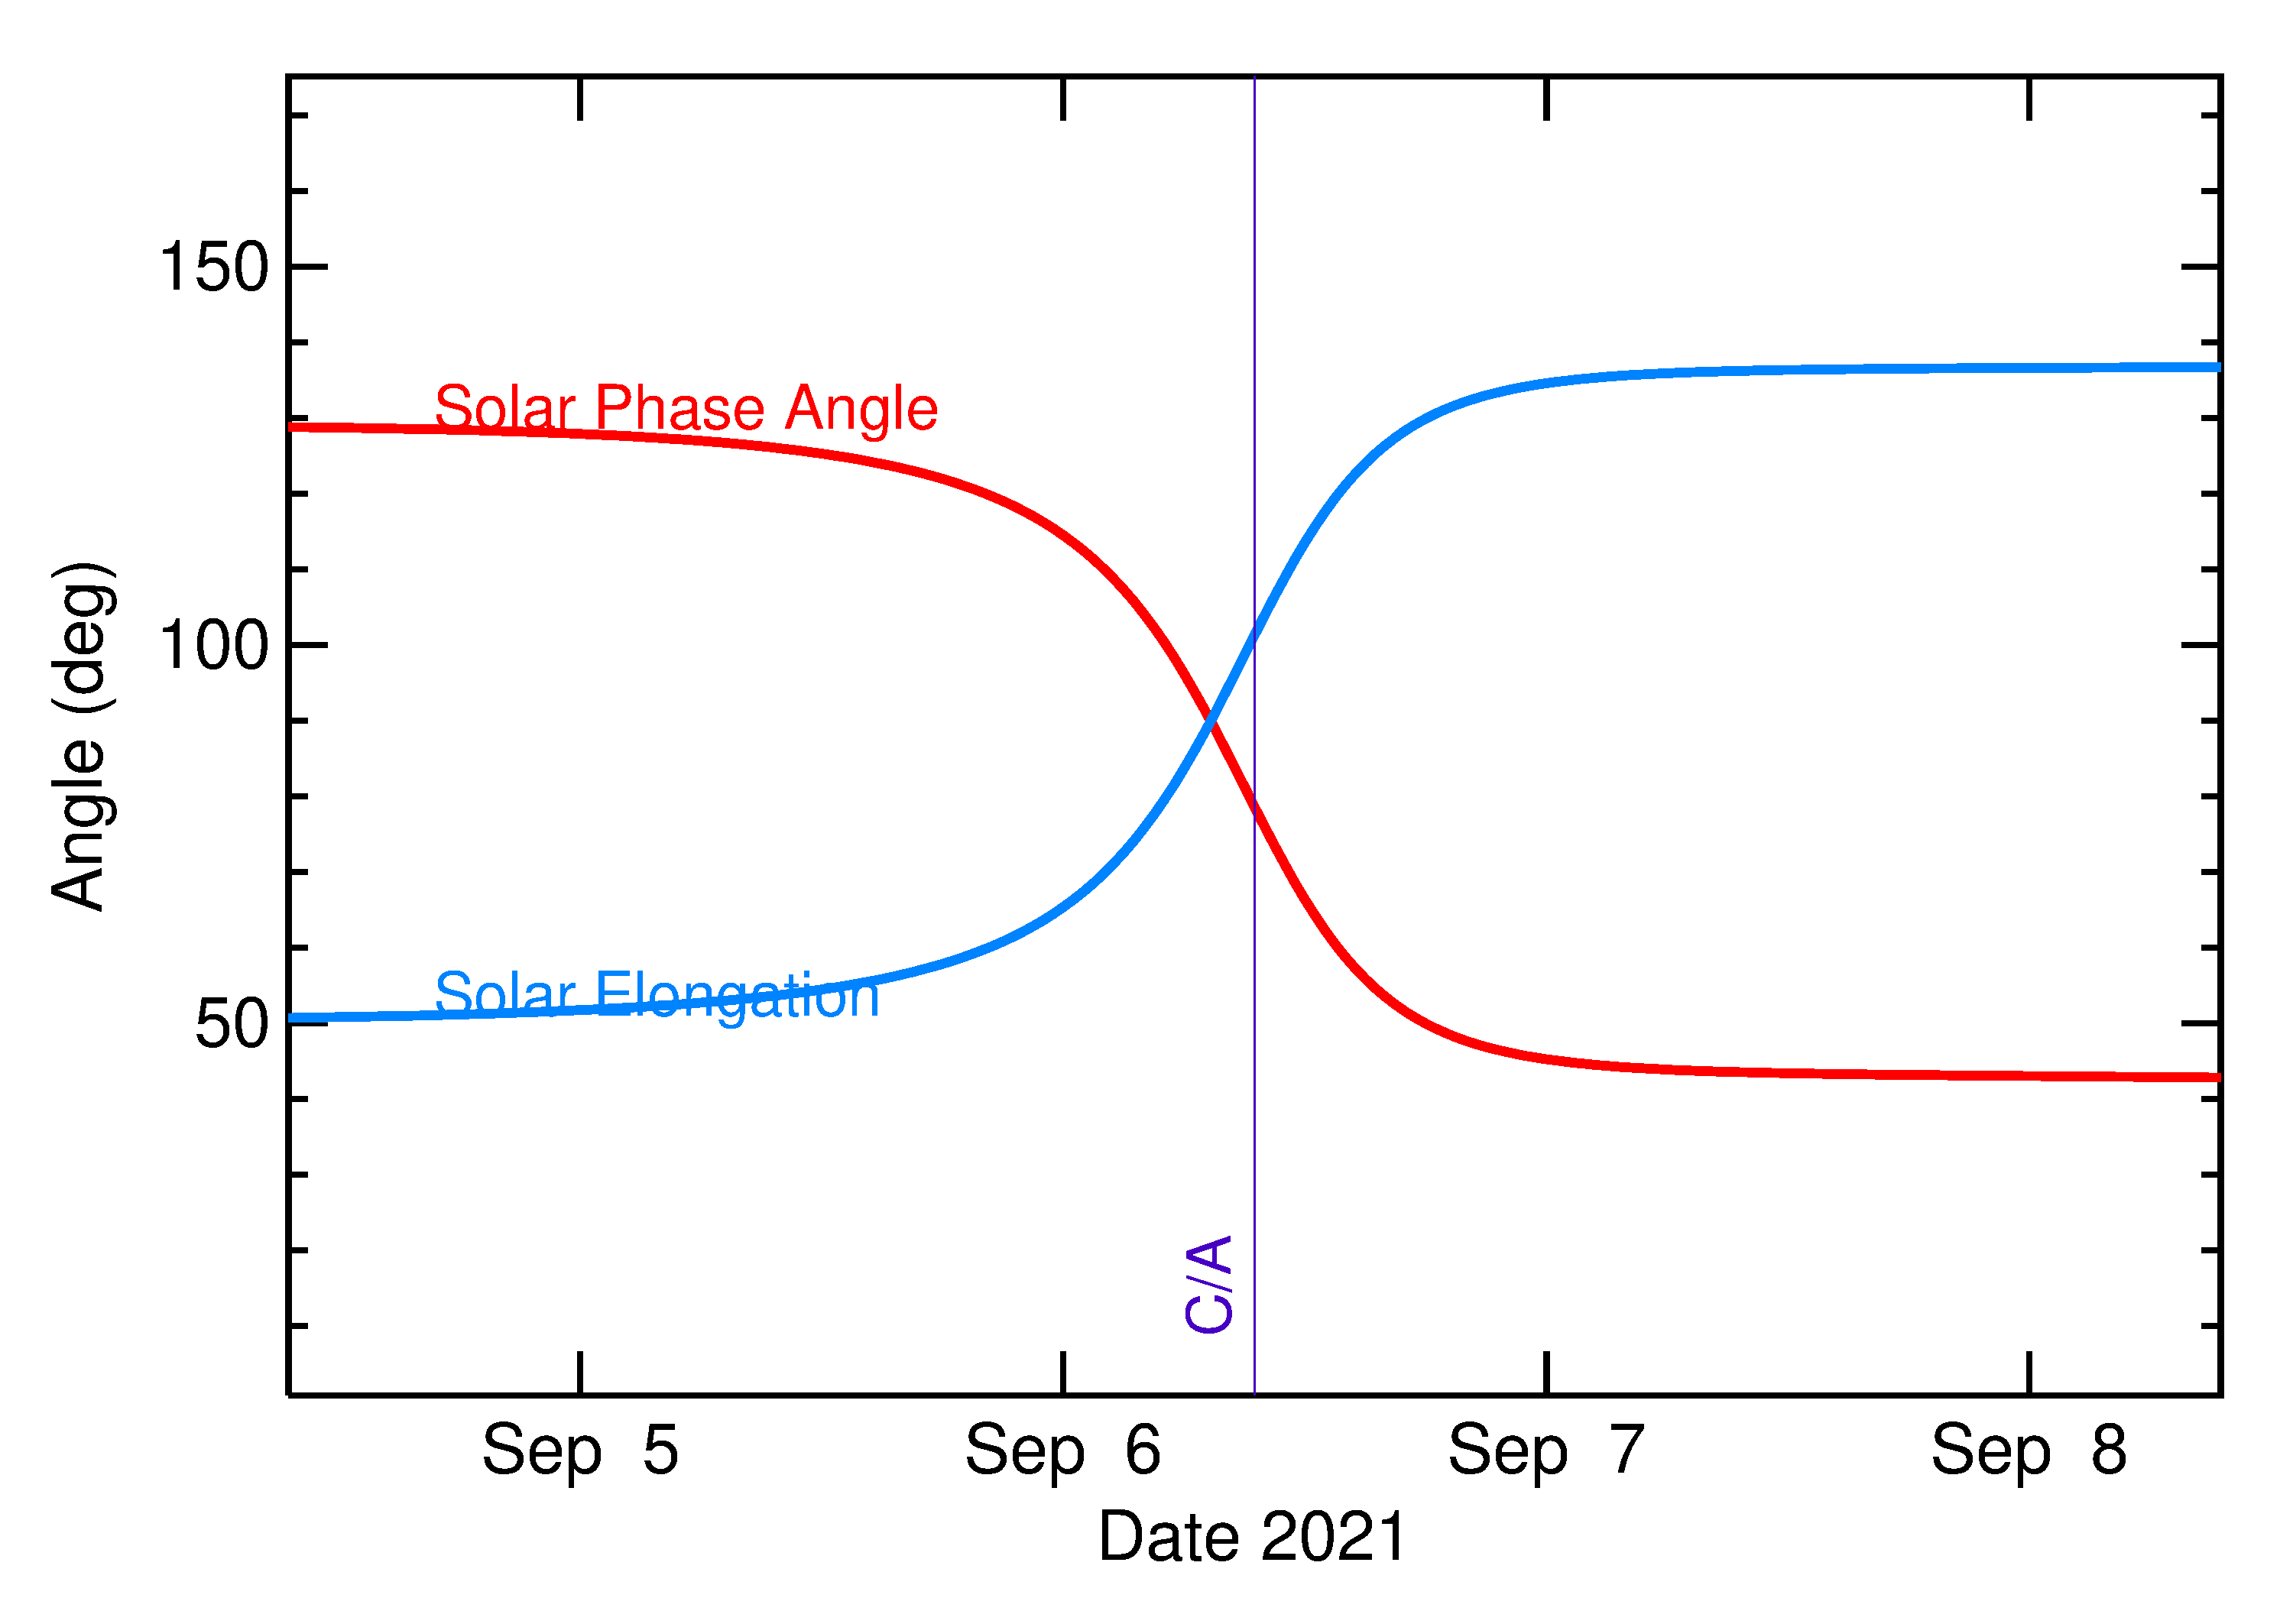 Solar Elongation and Solar Phase Angle of 2021 RT4 in the days around closest approach